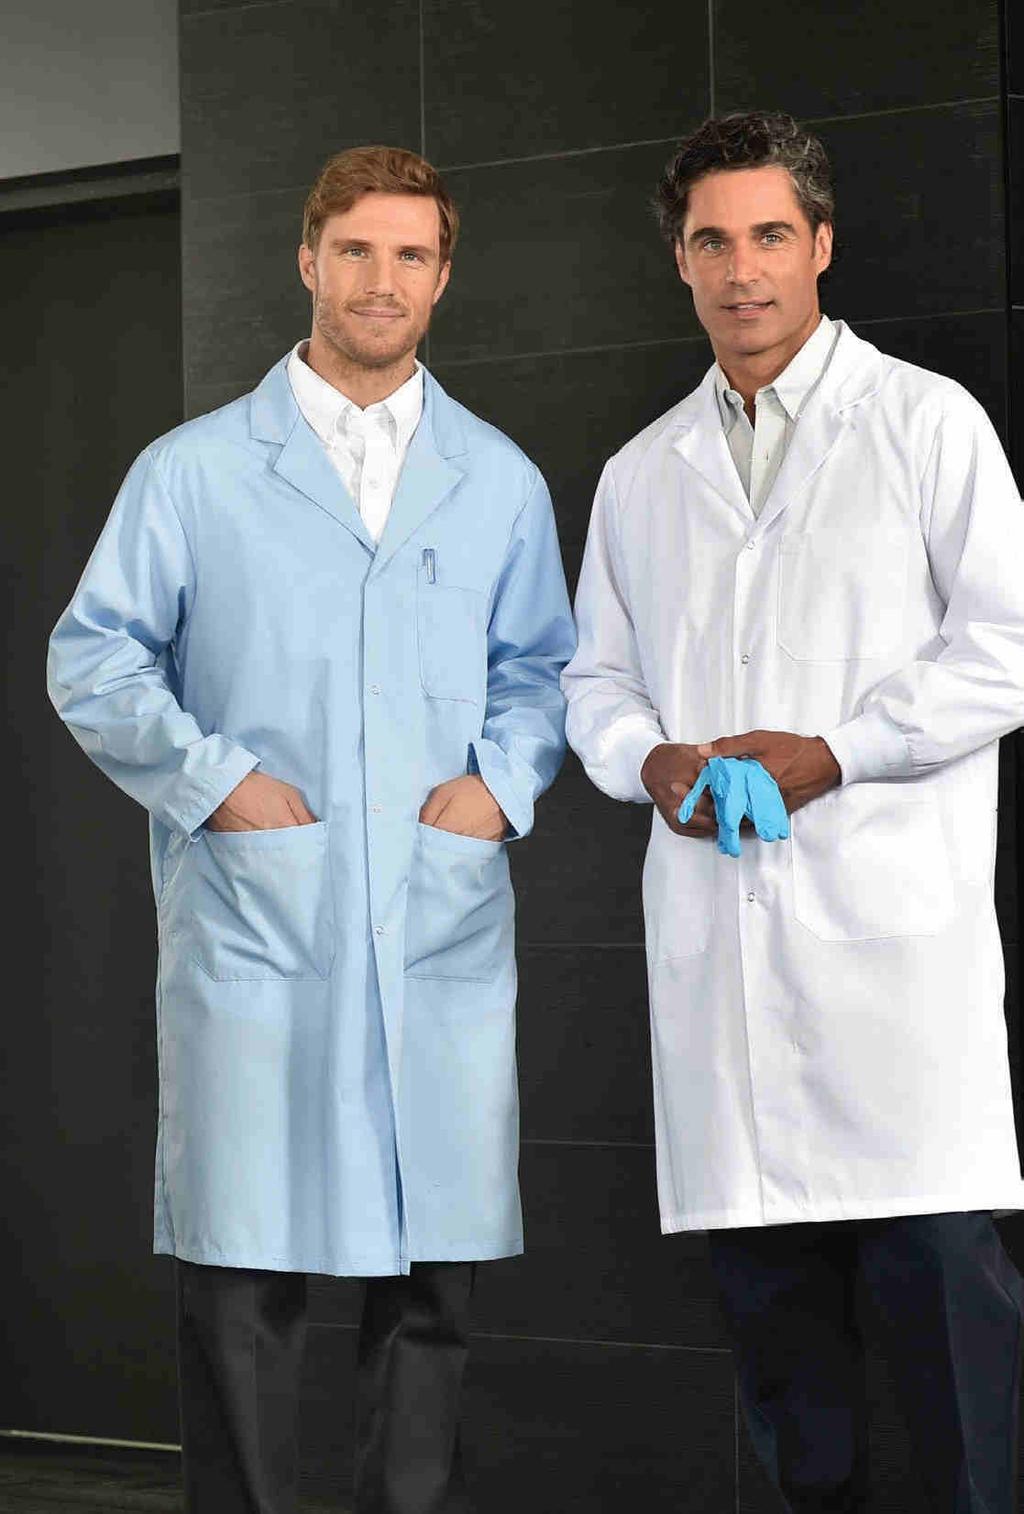 LAB COATS Men s lab Coats Poly Cotton Made from a highly-comfortable and lightweight 65/35 blend of Poly/Cotton in 5.5 oz.